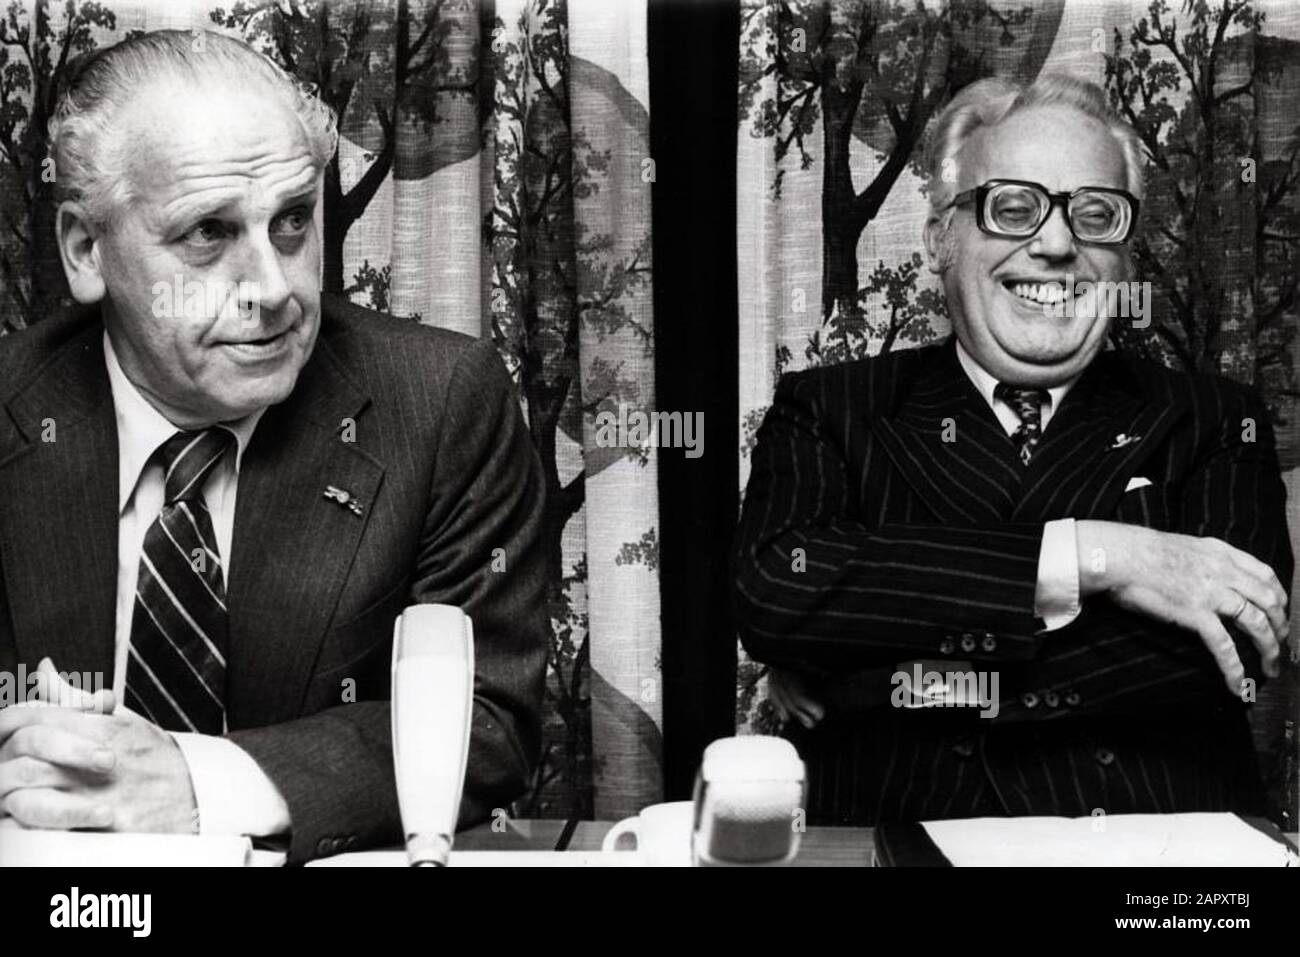 P.J. Verdam (glasses) as informator next to Vrolijk during a press conference. The Hague, Netherlands, 12 October 1977.; Stock Photo